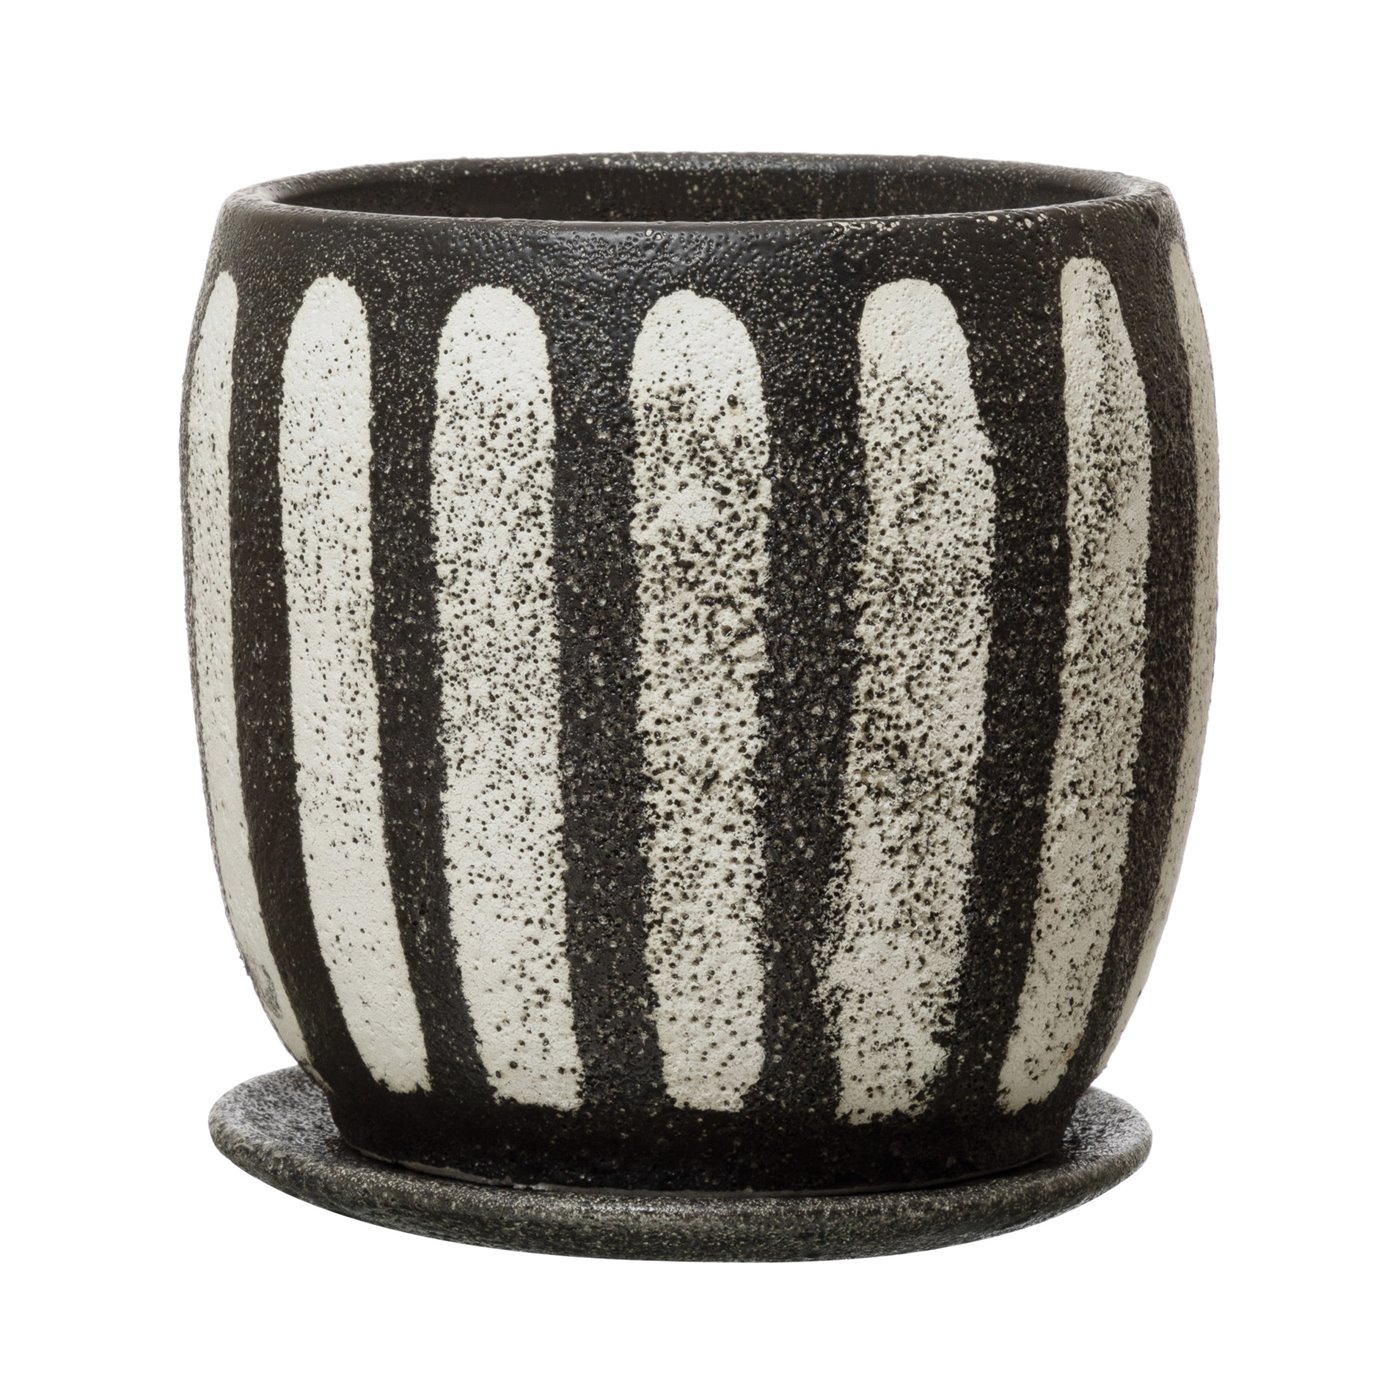 Hand-Painted Terra-cotta Planter with Saucer, Black & White, Set of 2 (Holds 6" Pot)